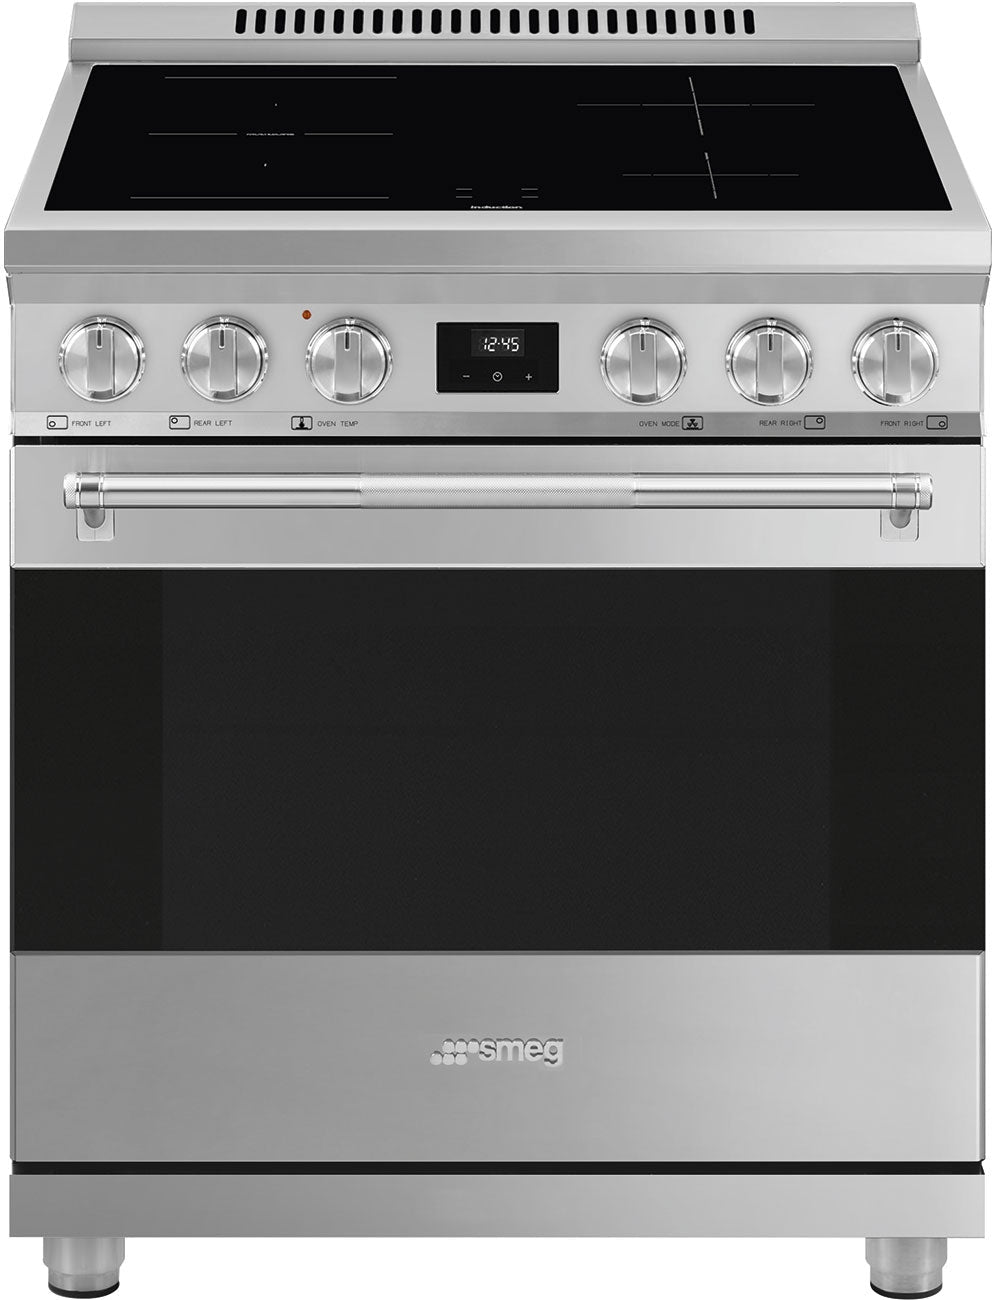 Smeg - 24" Stainless Steel Professional Induction Range - SPR24UIMX